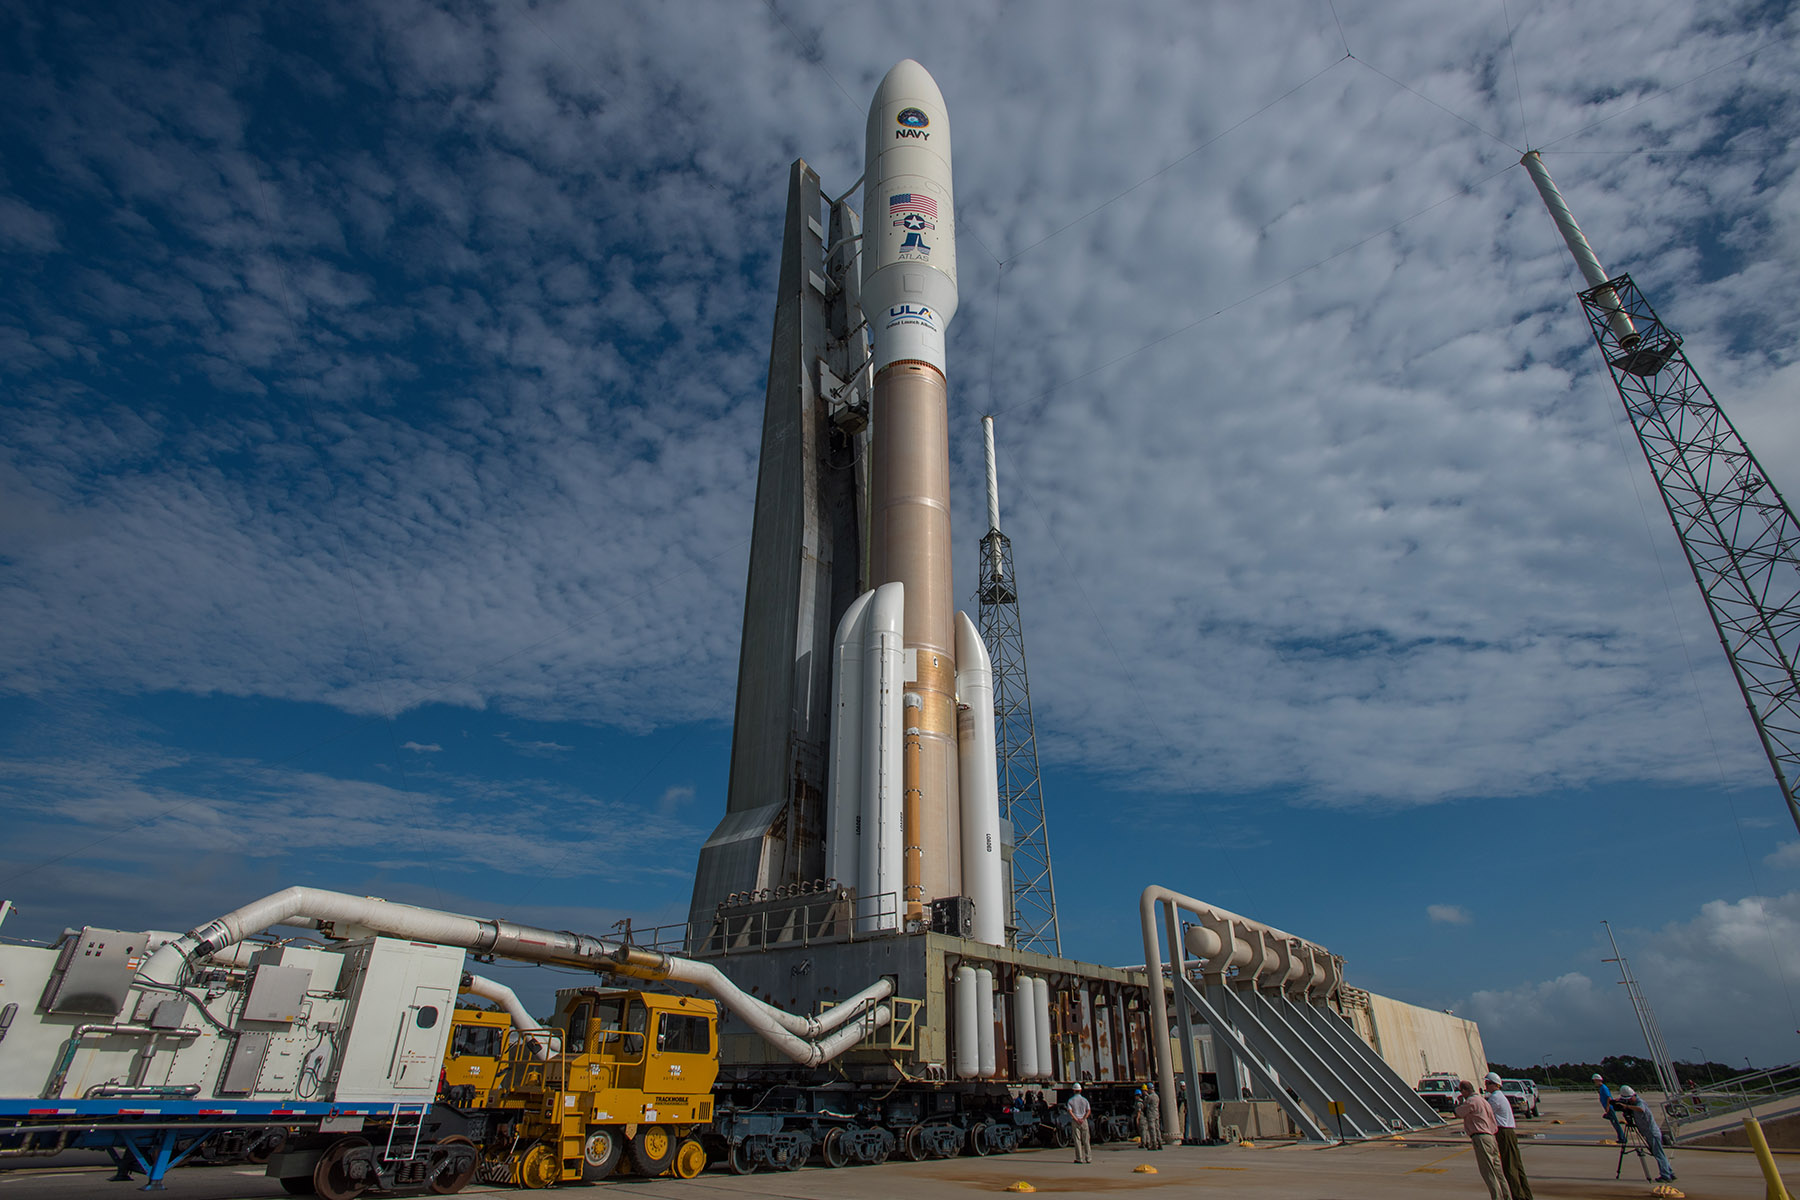 ULA's most powerful Atlas-V rocket, the Atlas 551, standing tall atop SLC-41 for a Wednesday morning launch attempt. Photo Credit: ULA